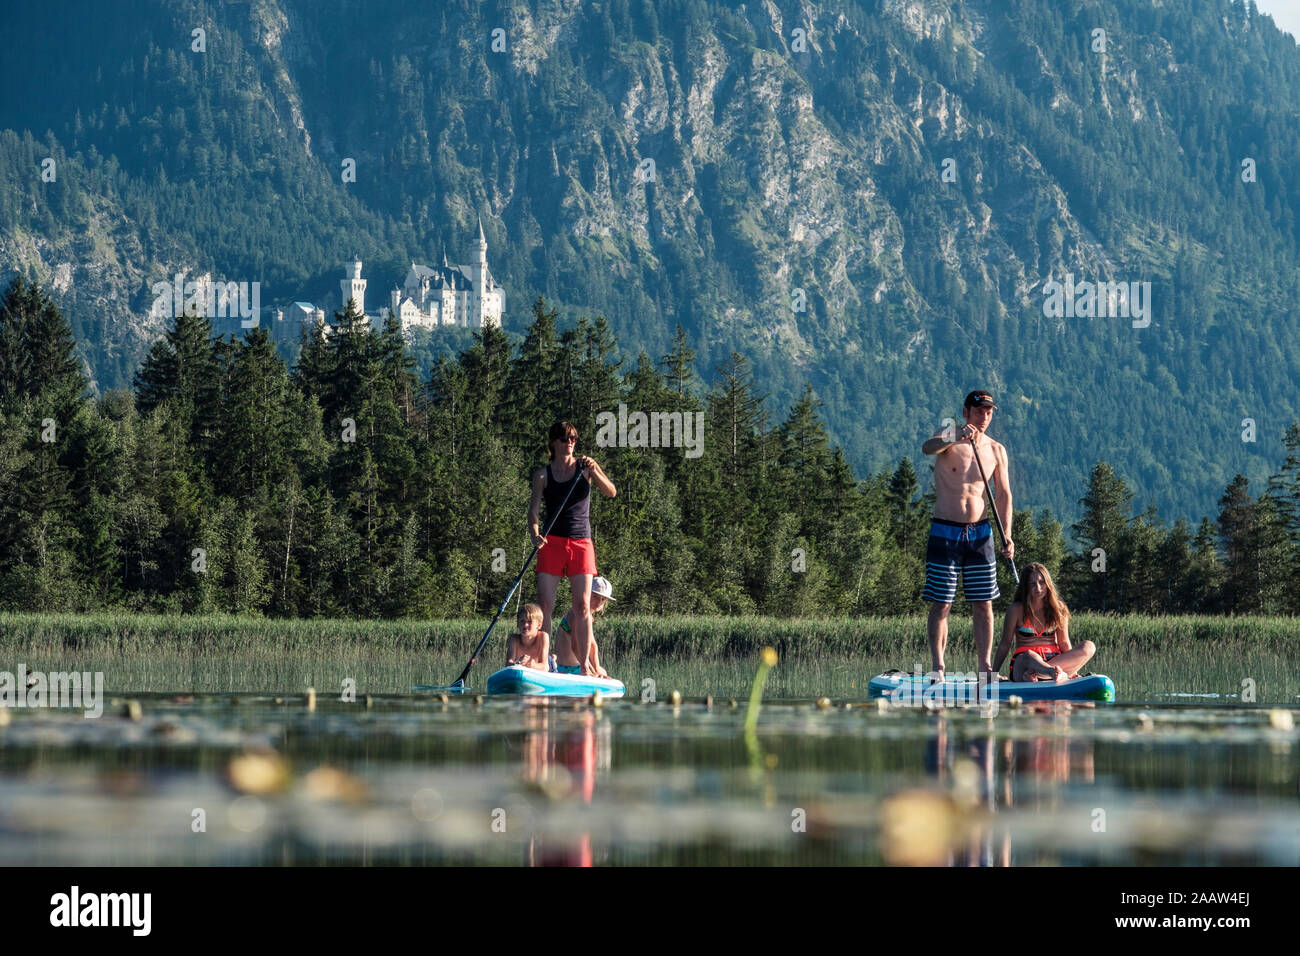 Family paddle boarding on lake Bannwaldsee, Castle Neuschwanstein in the background, Fuessen, Germany Stock Photo